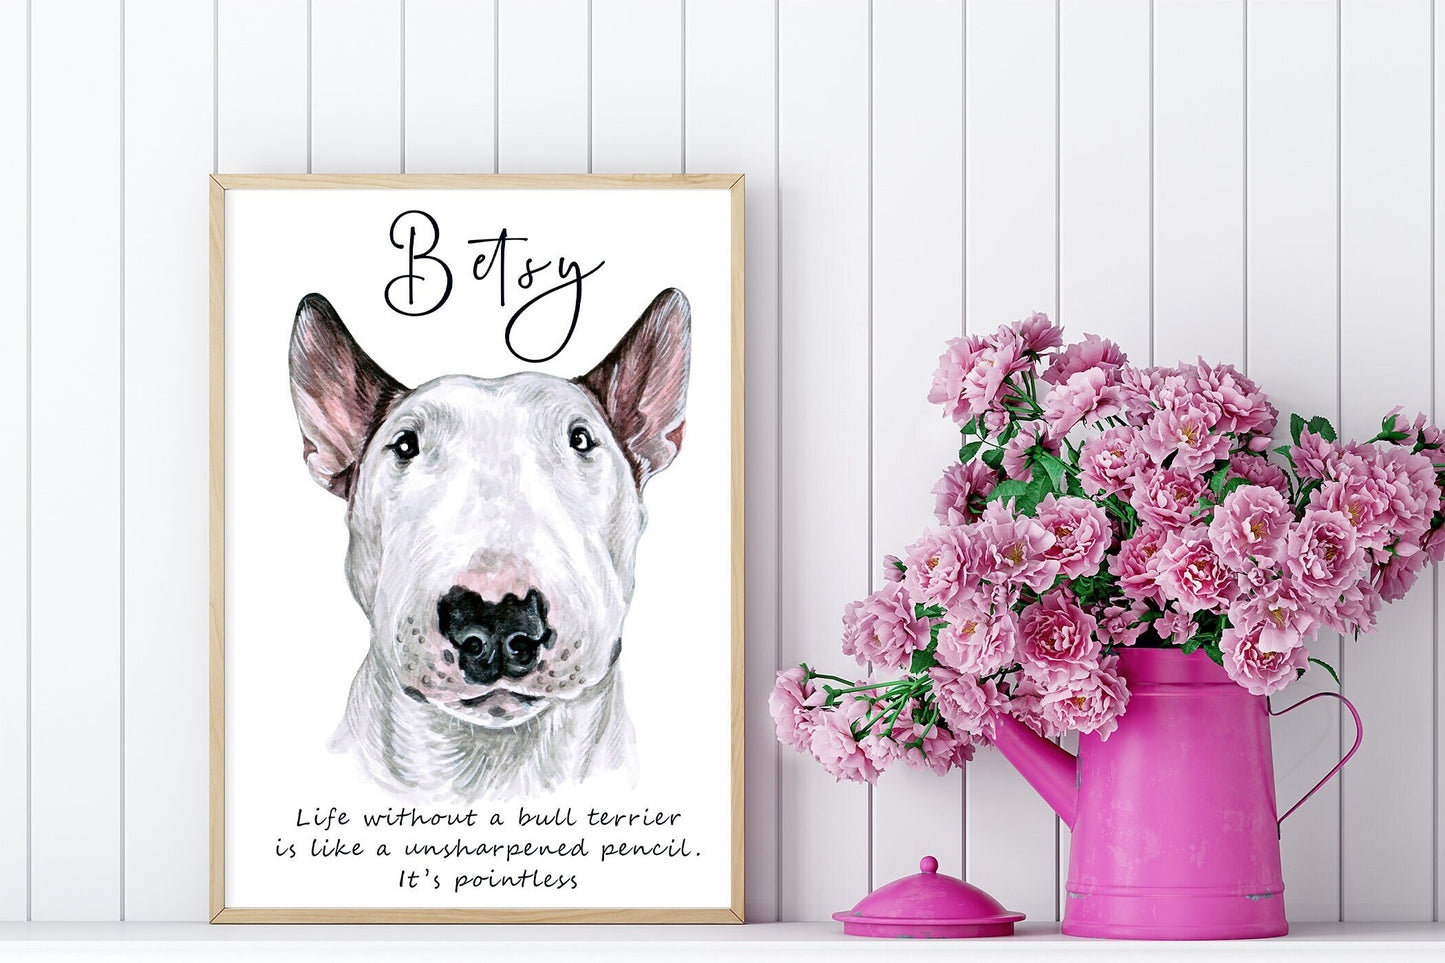 Bull terrier wall art - charming dog portraits with custom funny or heart warming message | A4 | A5 | Greeting card